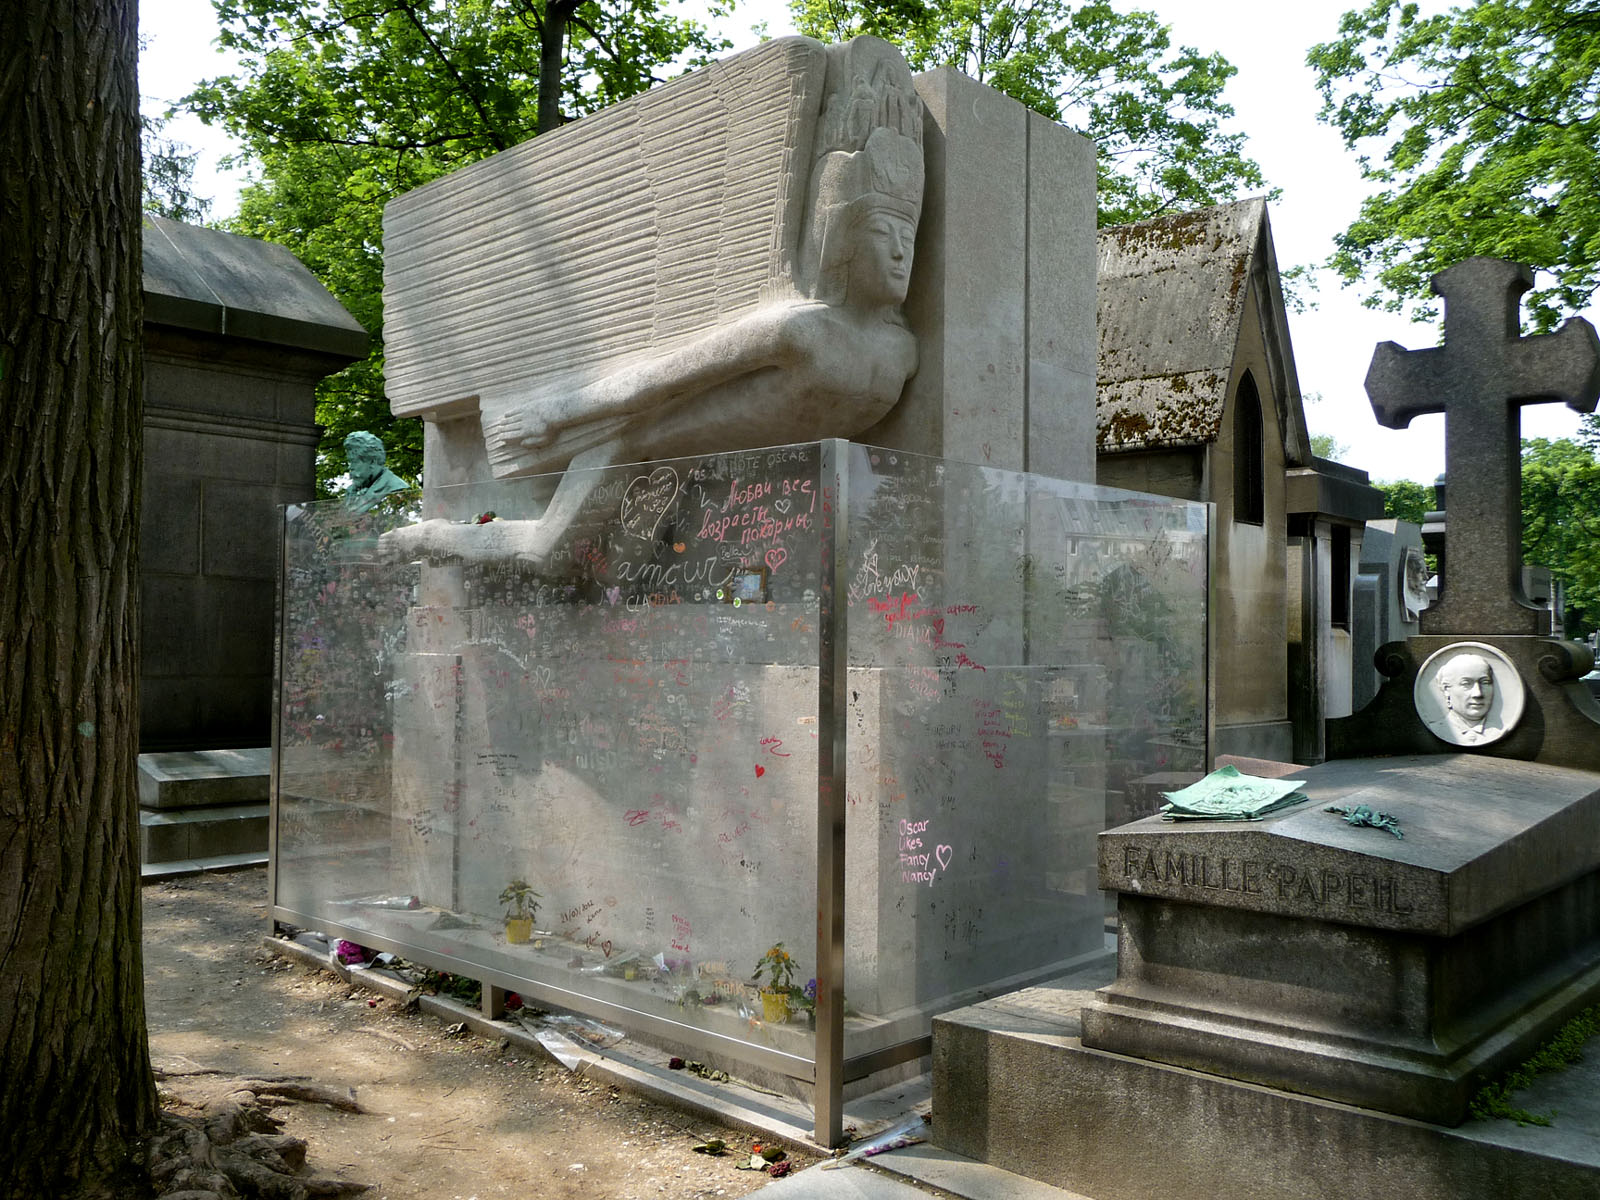 Le topic insolite - Page 14 Tomb_of_Oscar_Wilde_Pere_Lachaise_cemetery_Paris_France